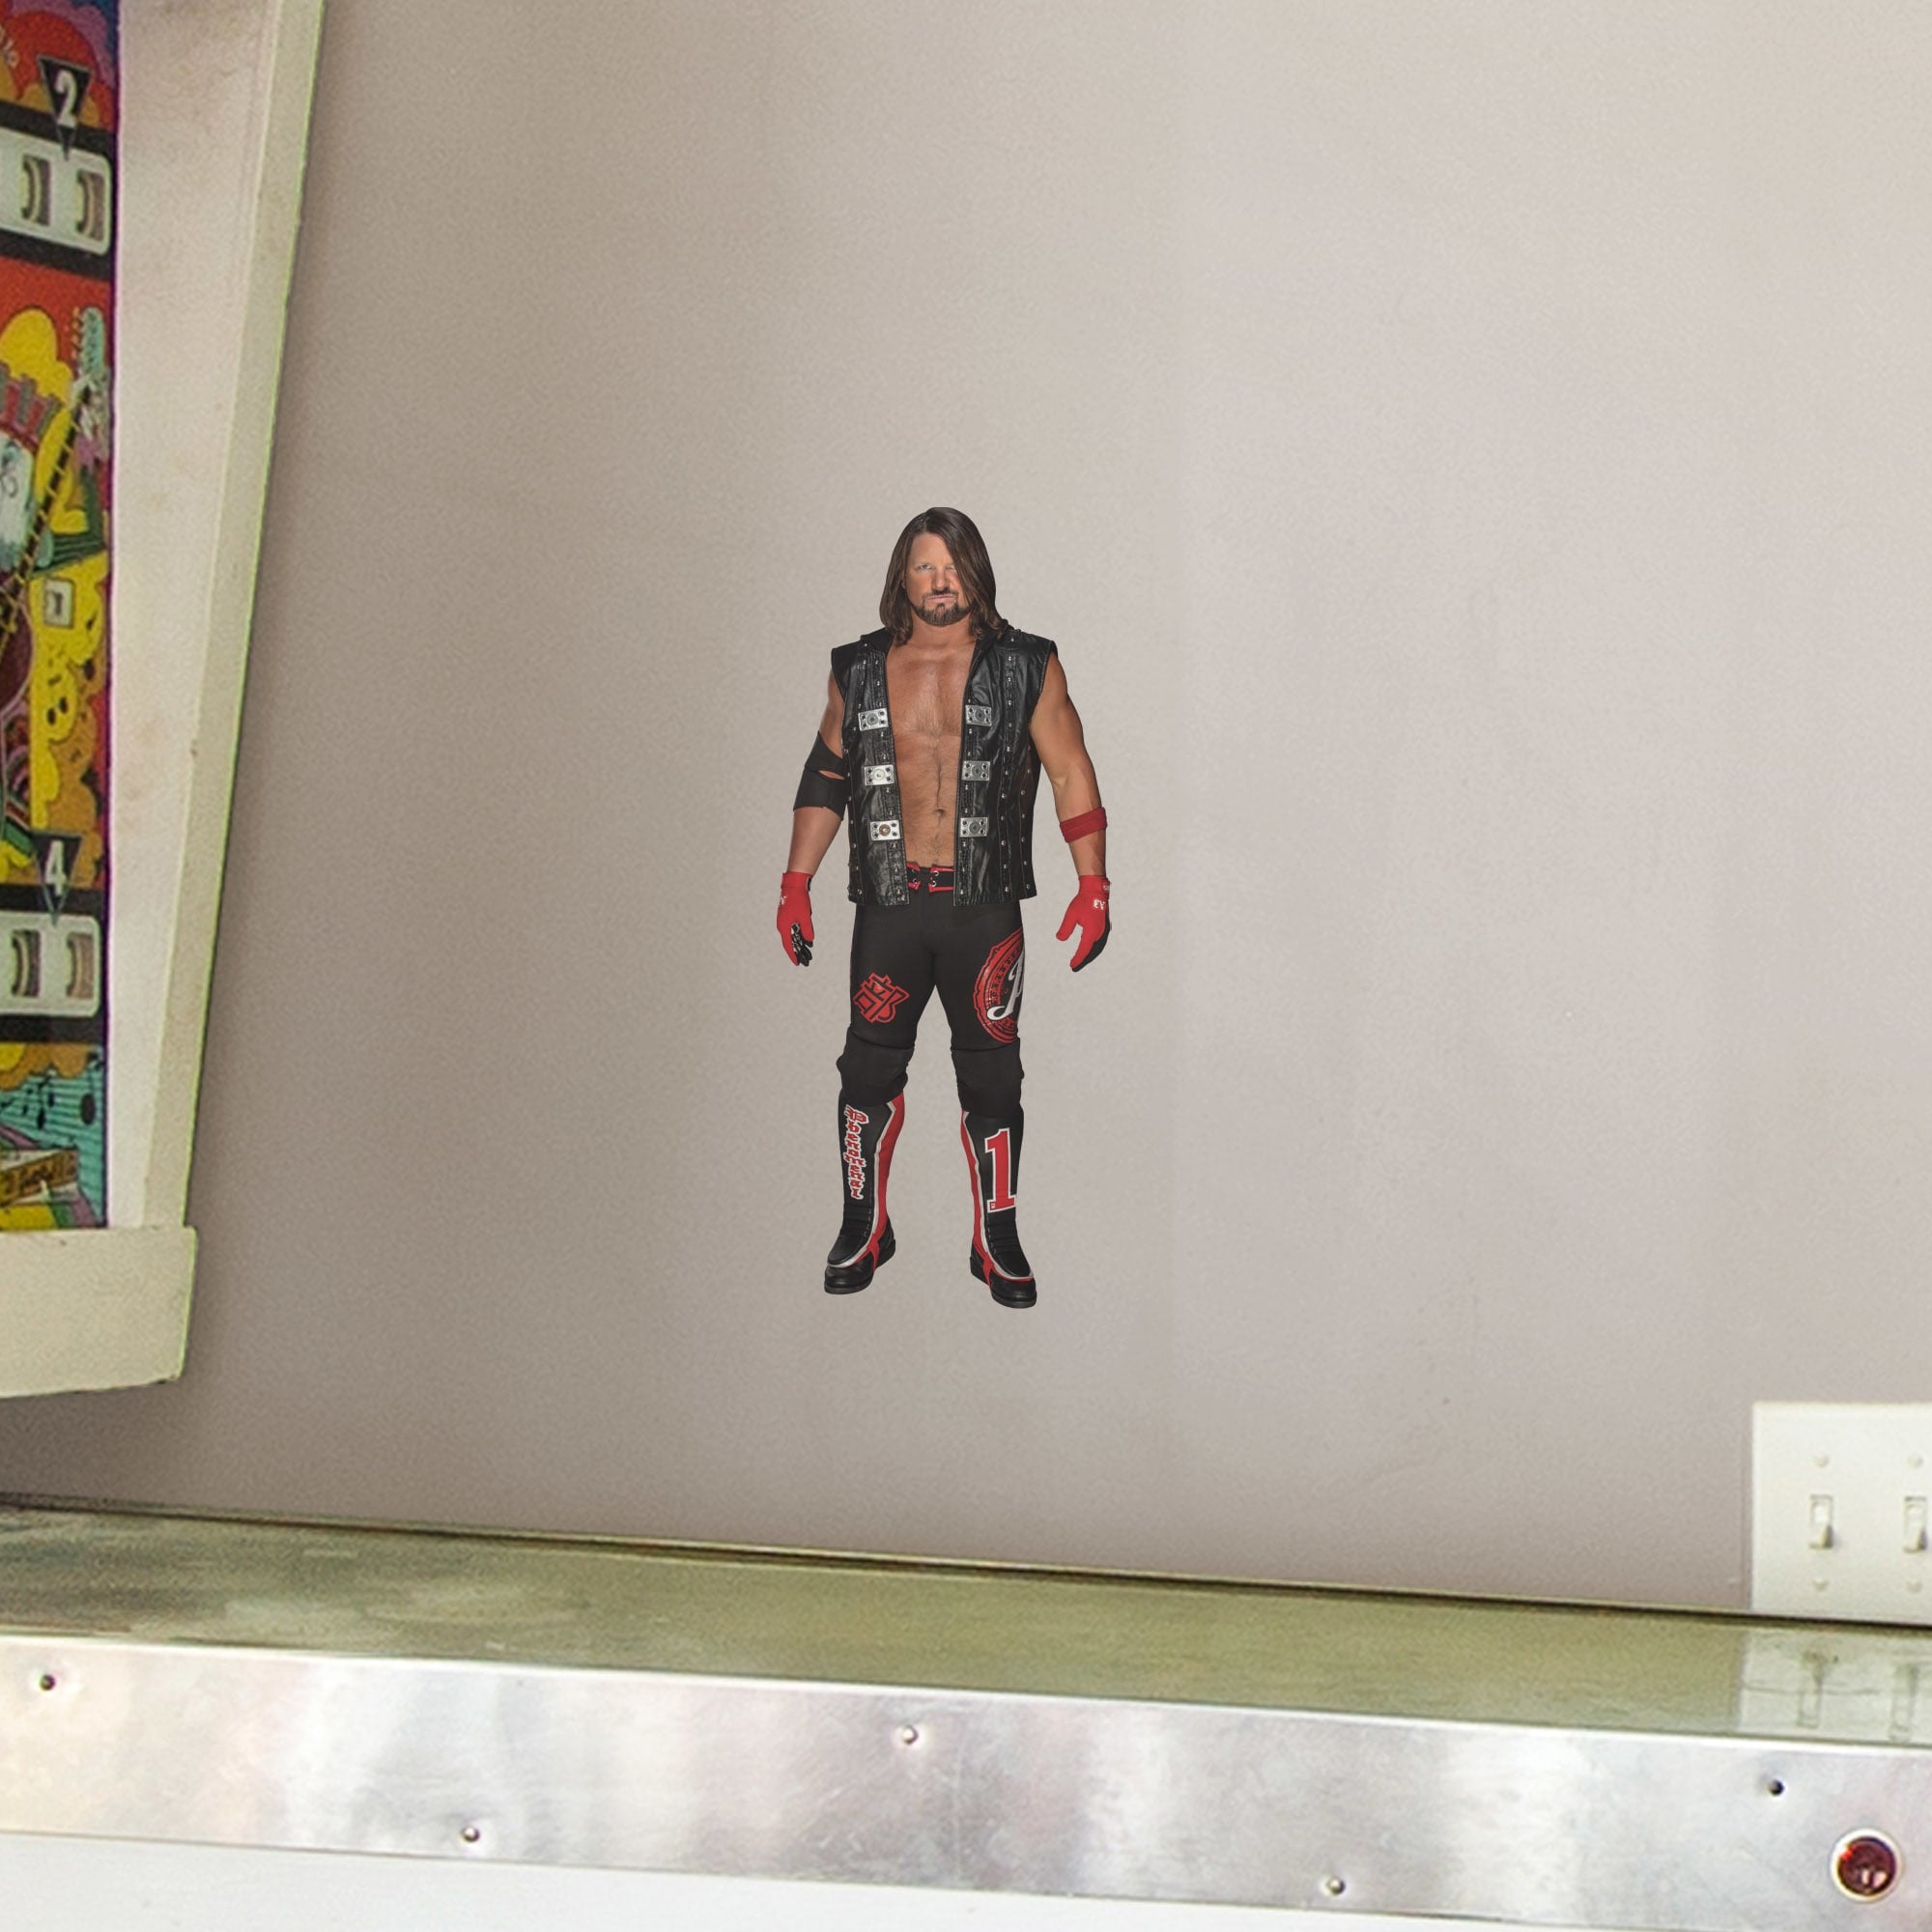 AJ Styles for WWE - Officially Licensed Removable Wall Decal Large by Fathead | Vinyl